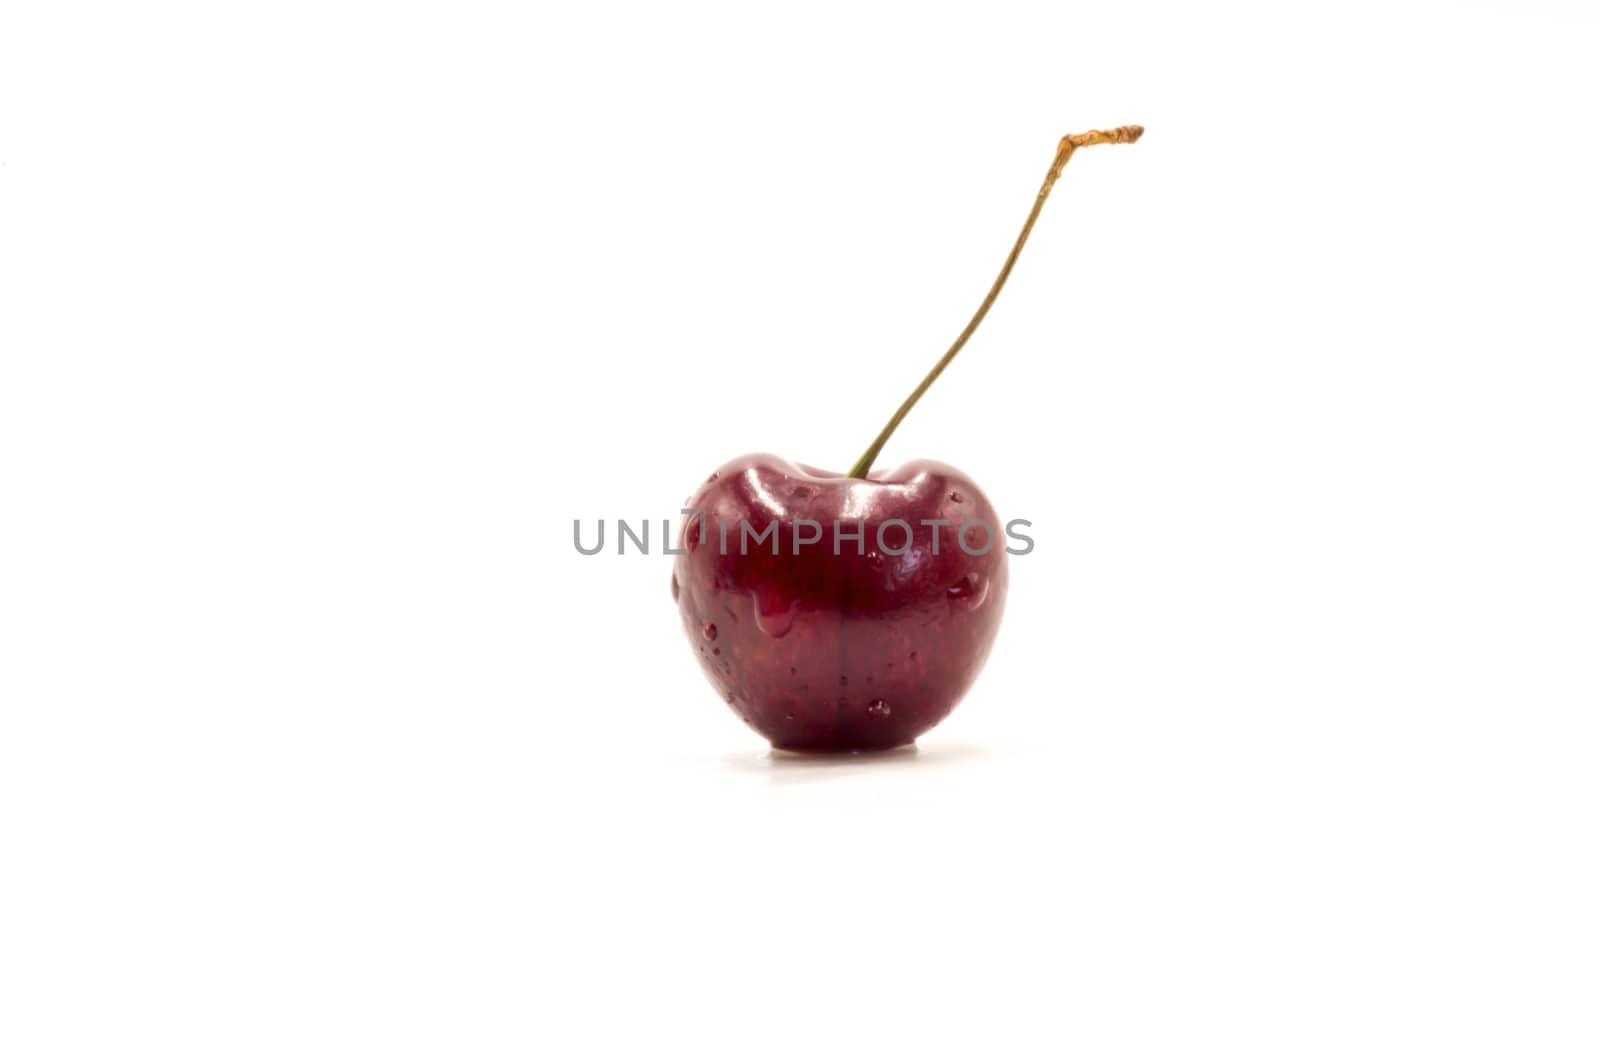 Cherry isolated on white background with clipping path, fresh cherry with a stem